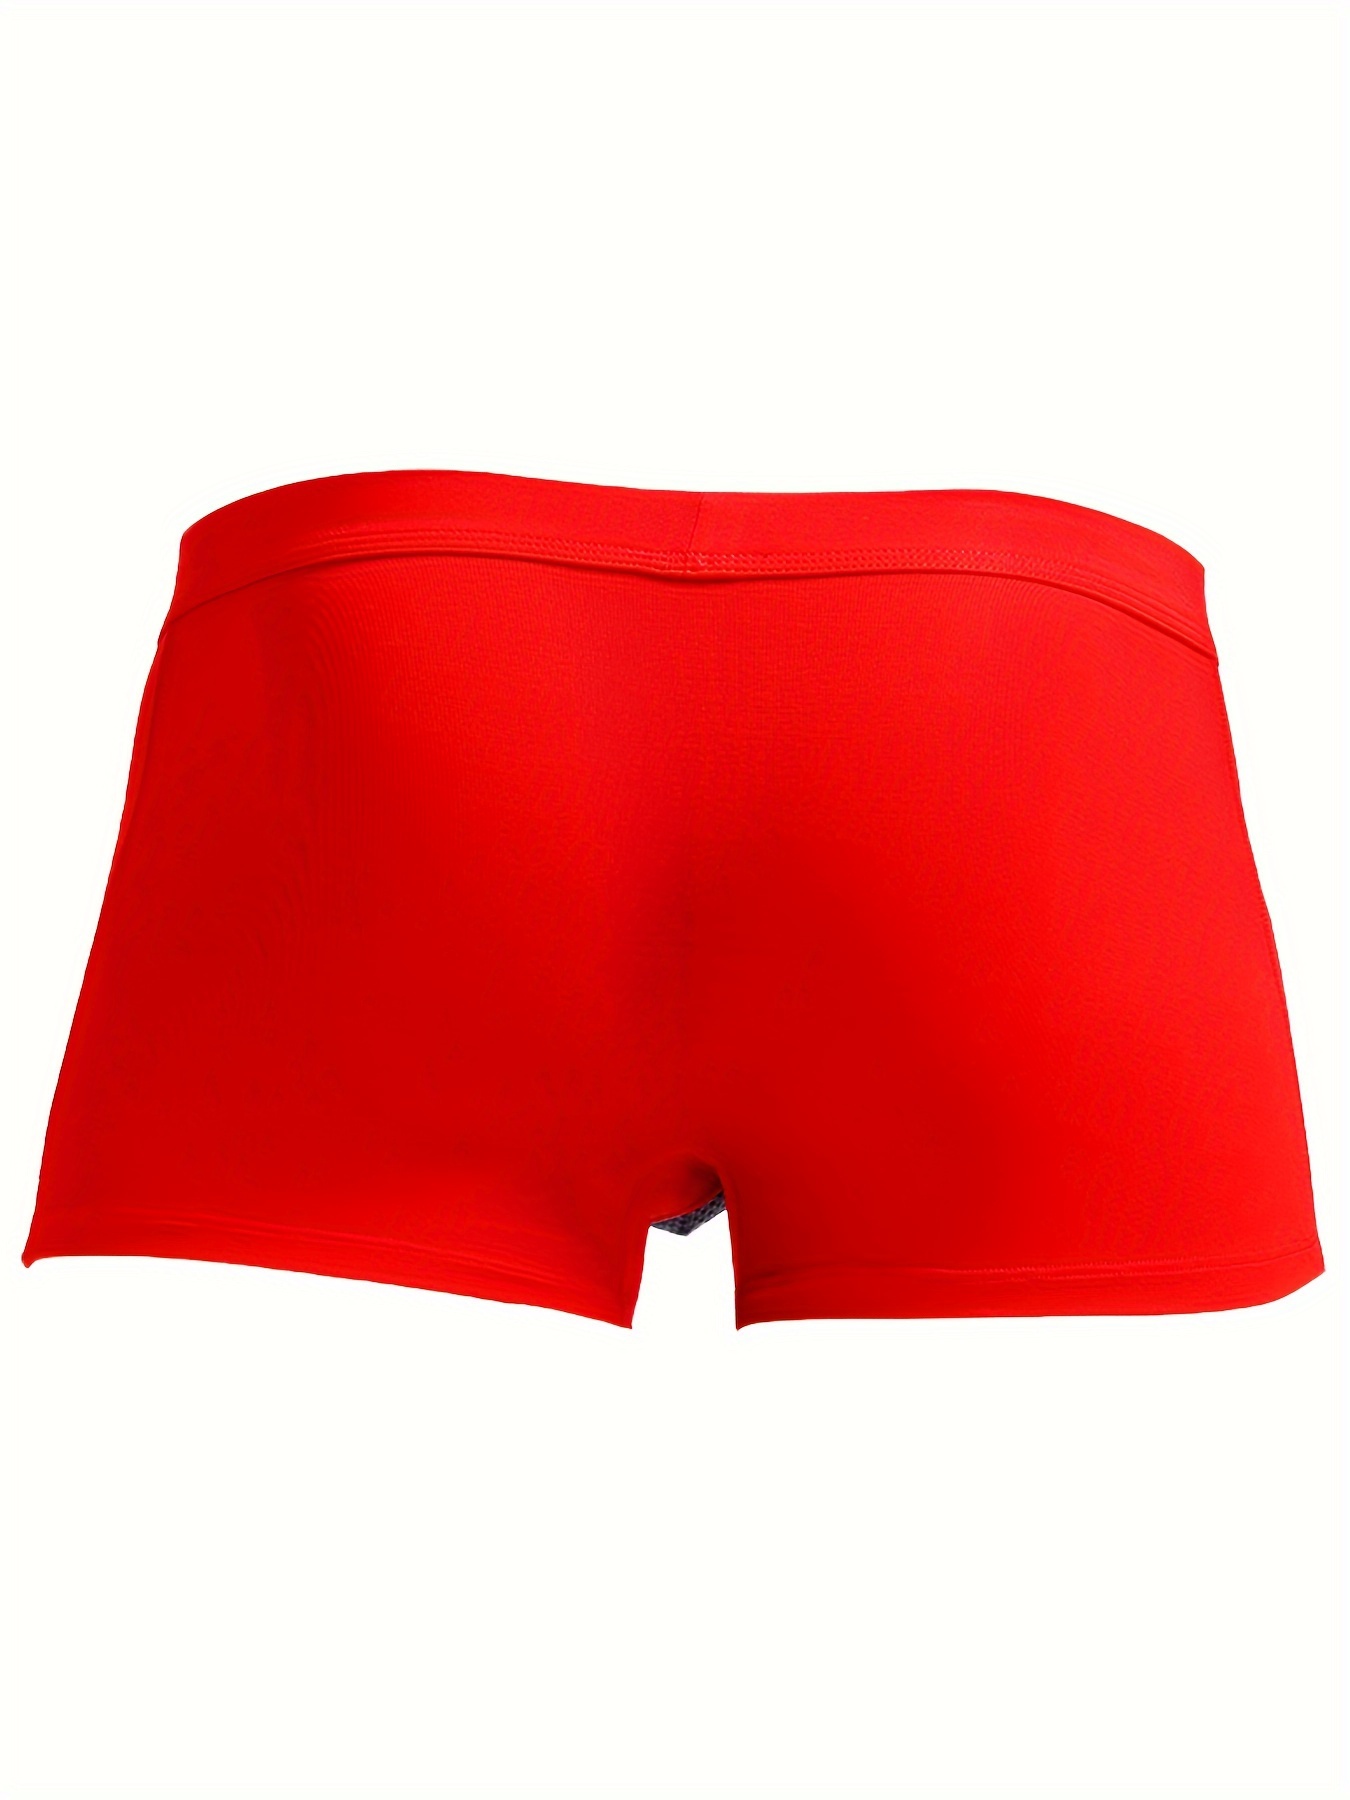 Buy Mens Bulge Ball Pouch Underwear Sexy Boxer Briefs Underpants